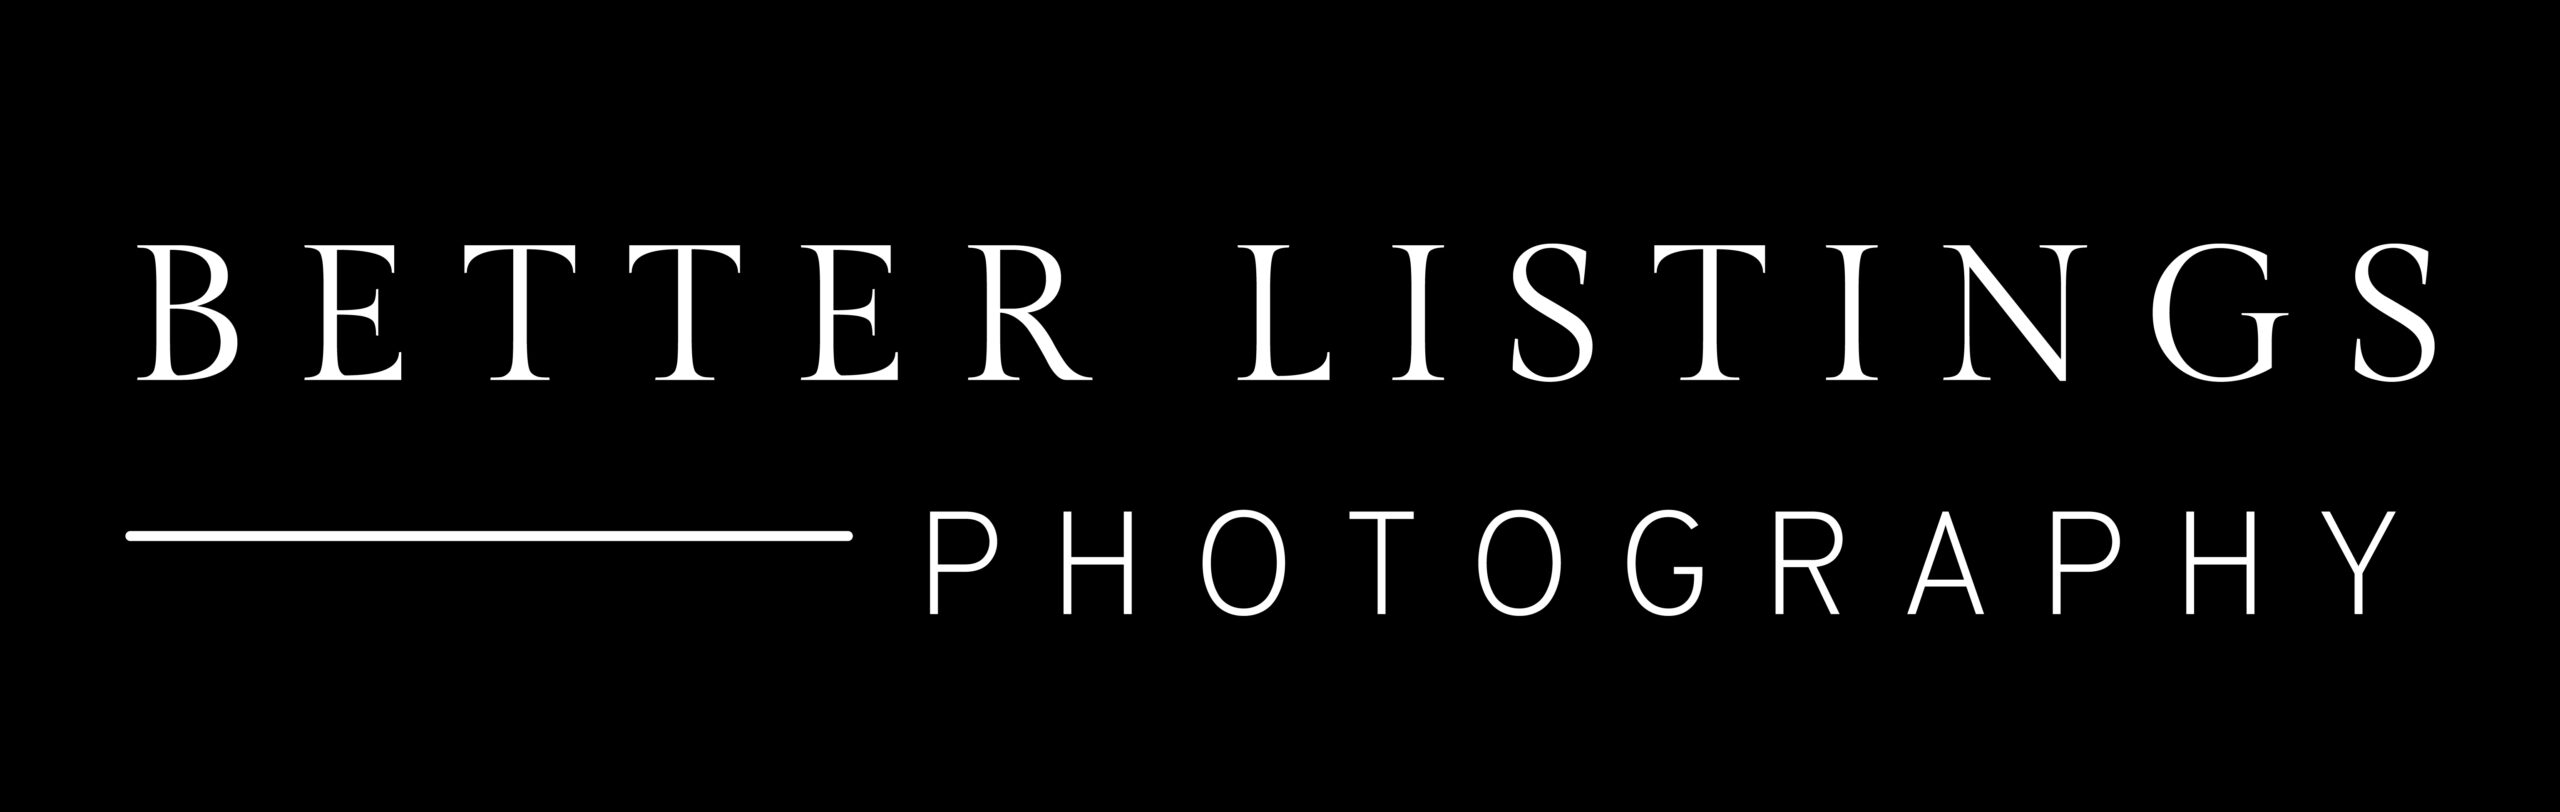 Better Listings Photography